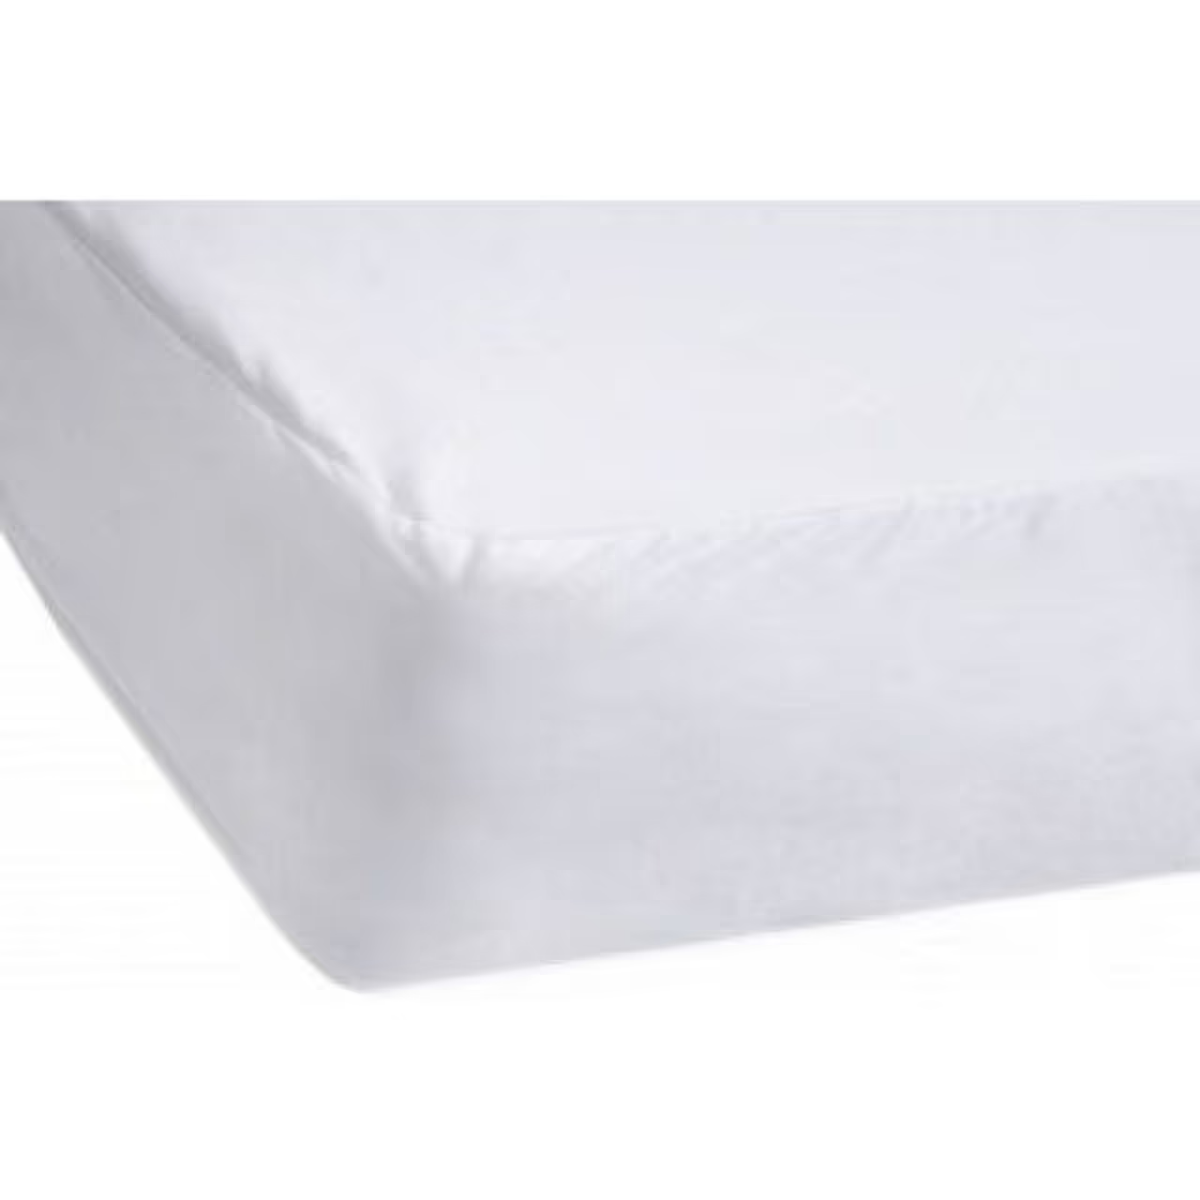 Mattress protectors | waterproof fitted single